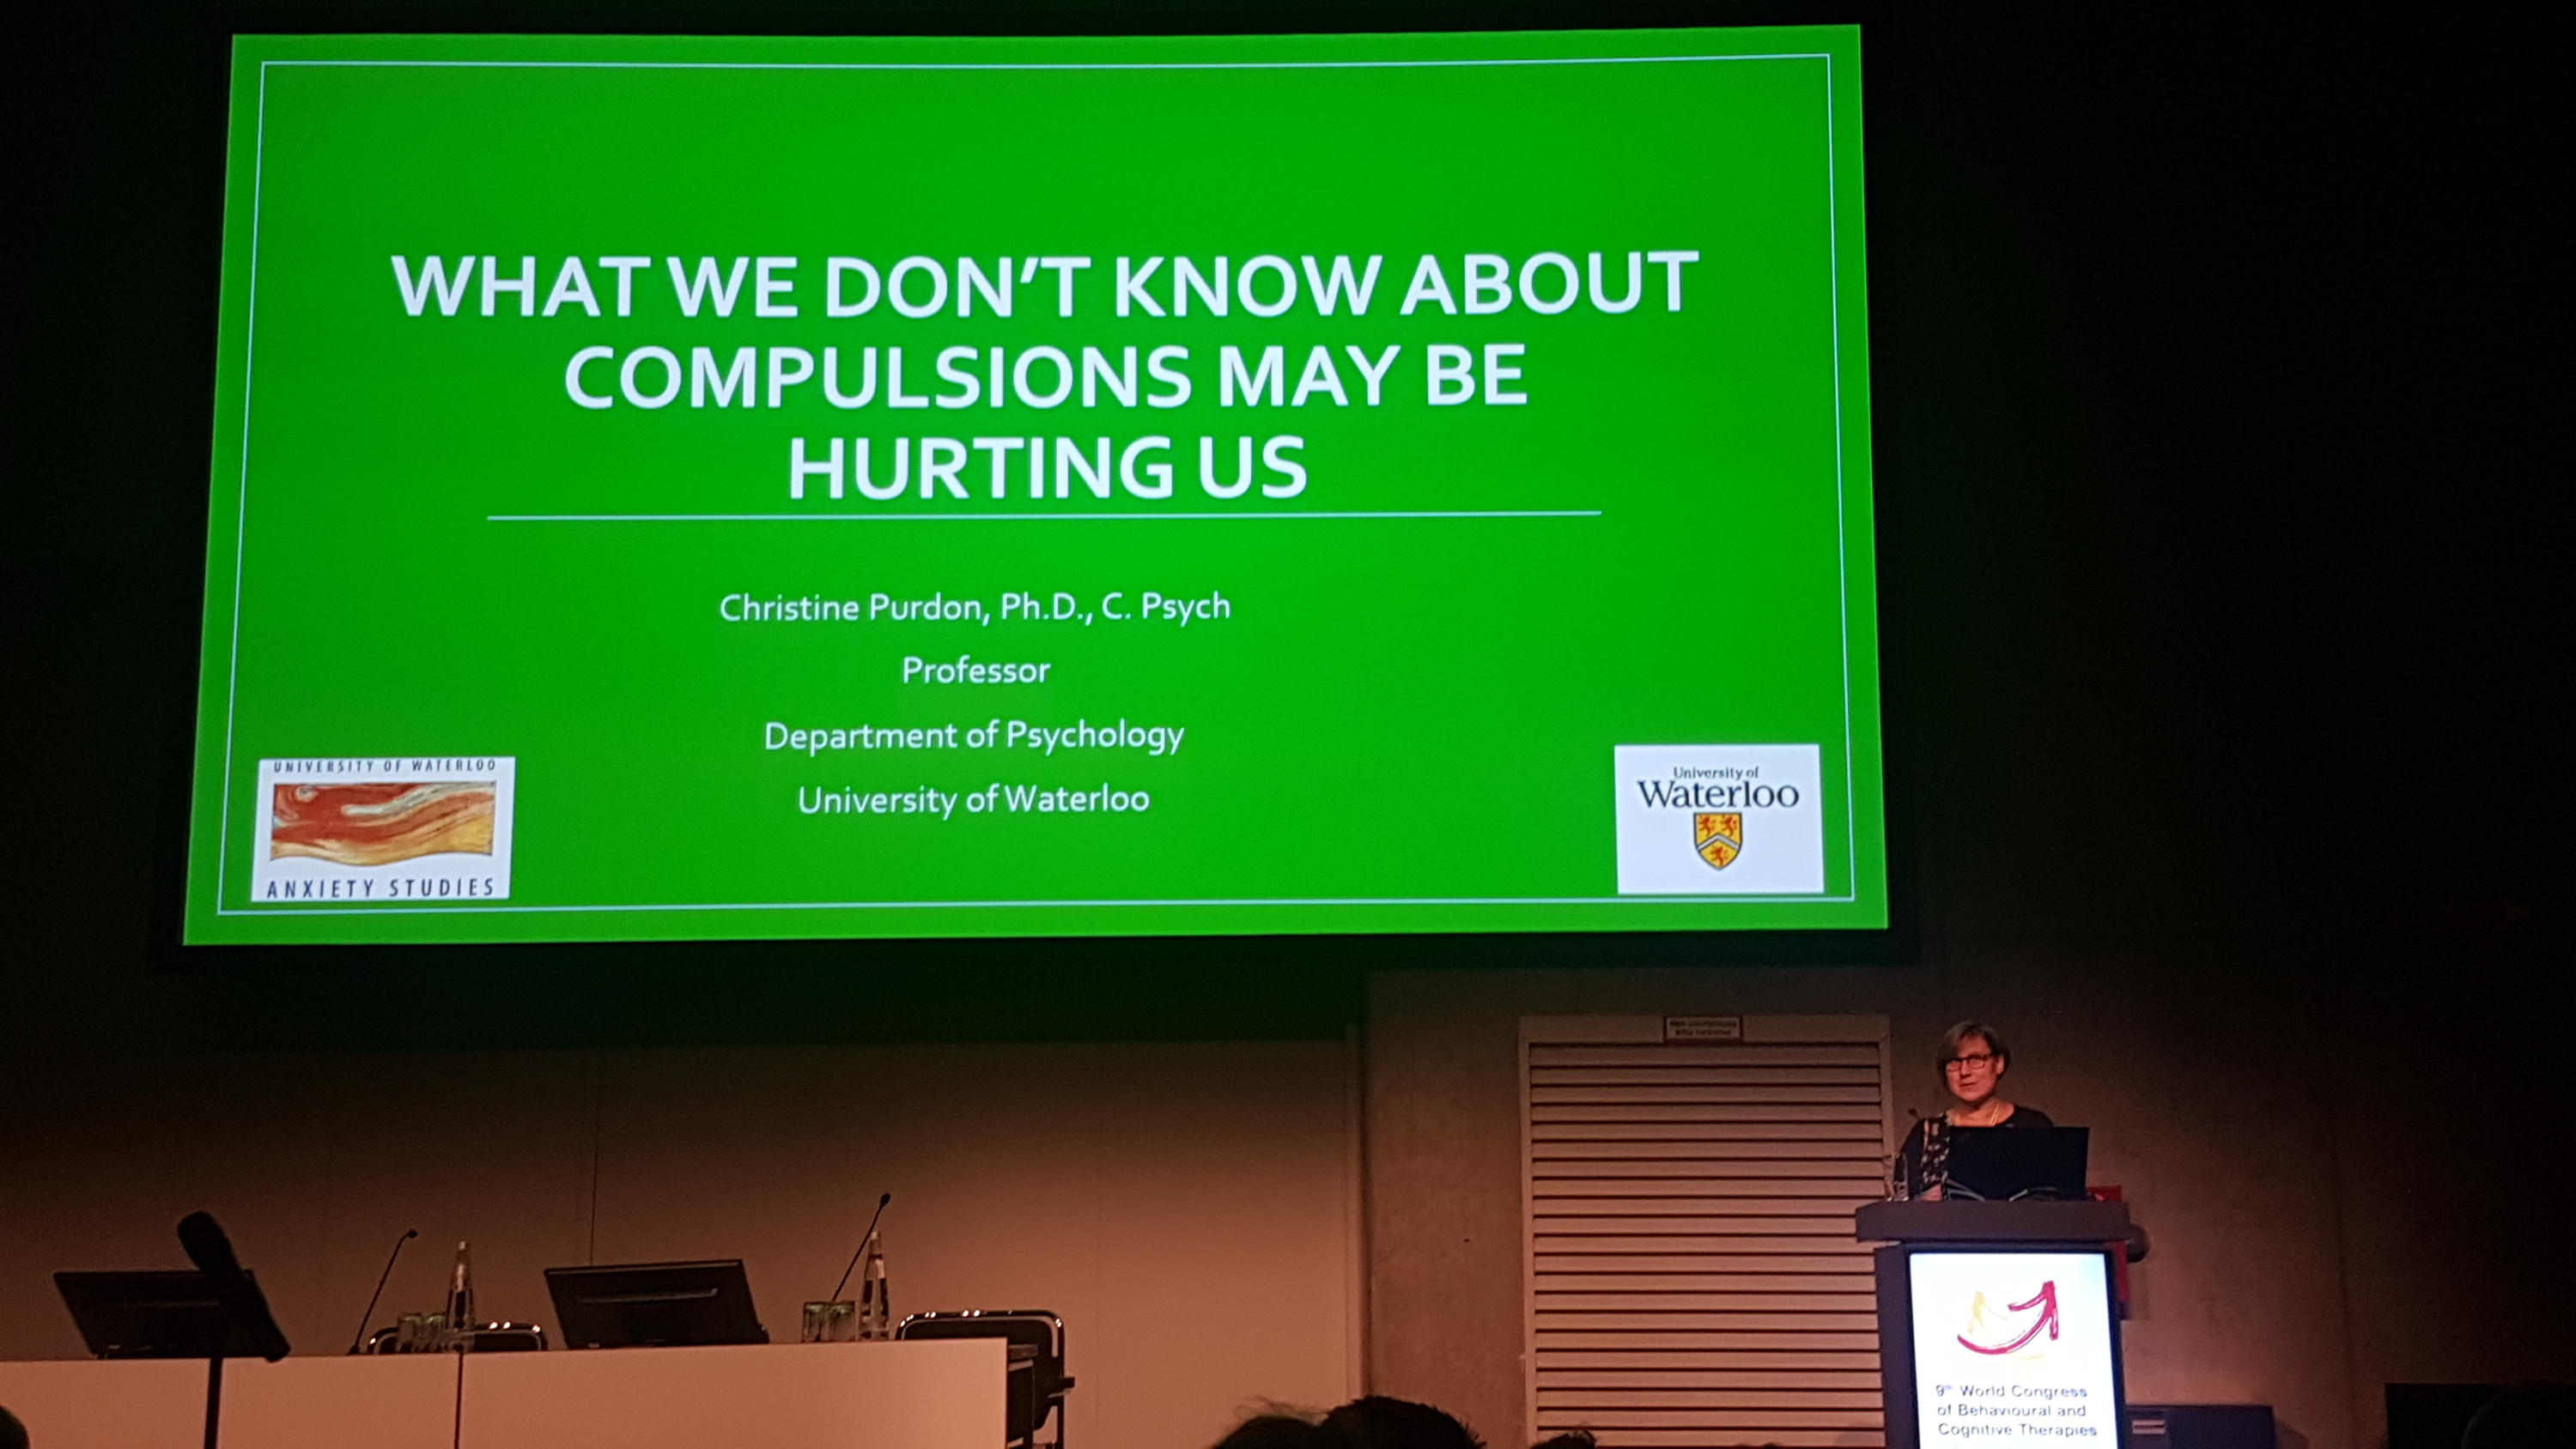 Dr. Purdon delivers her Plenary address at the 9th World Congress of Behavioural and Cognitive Therapies.